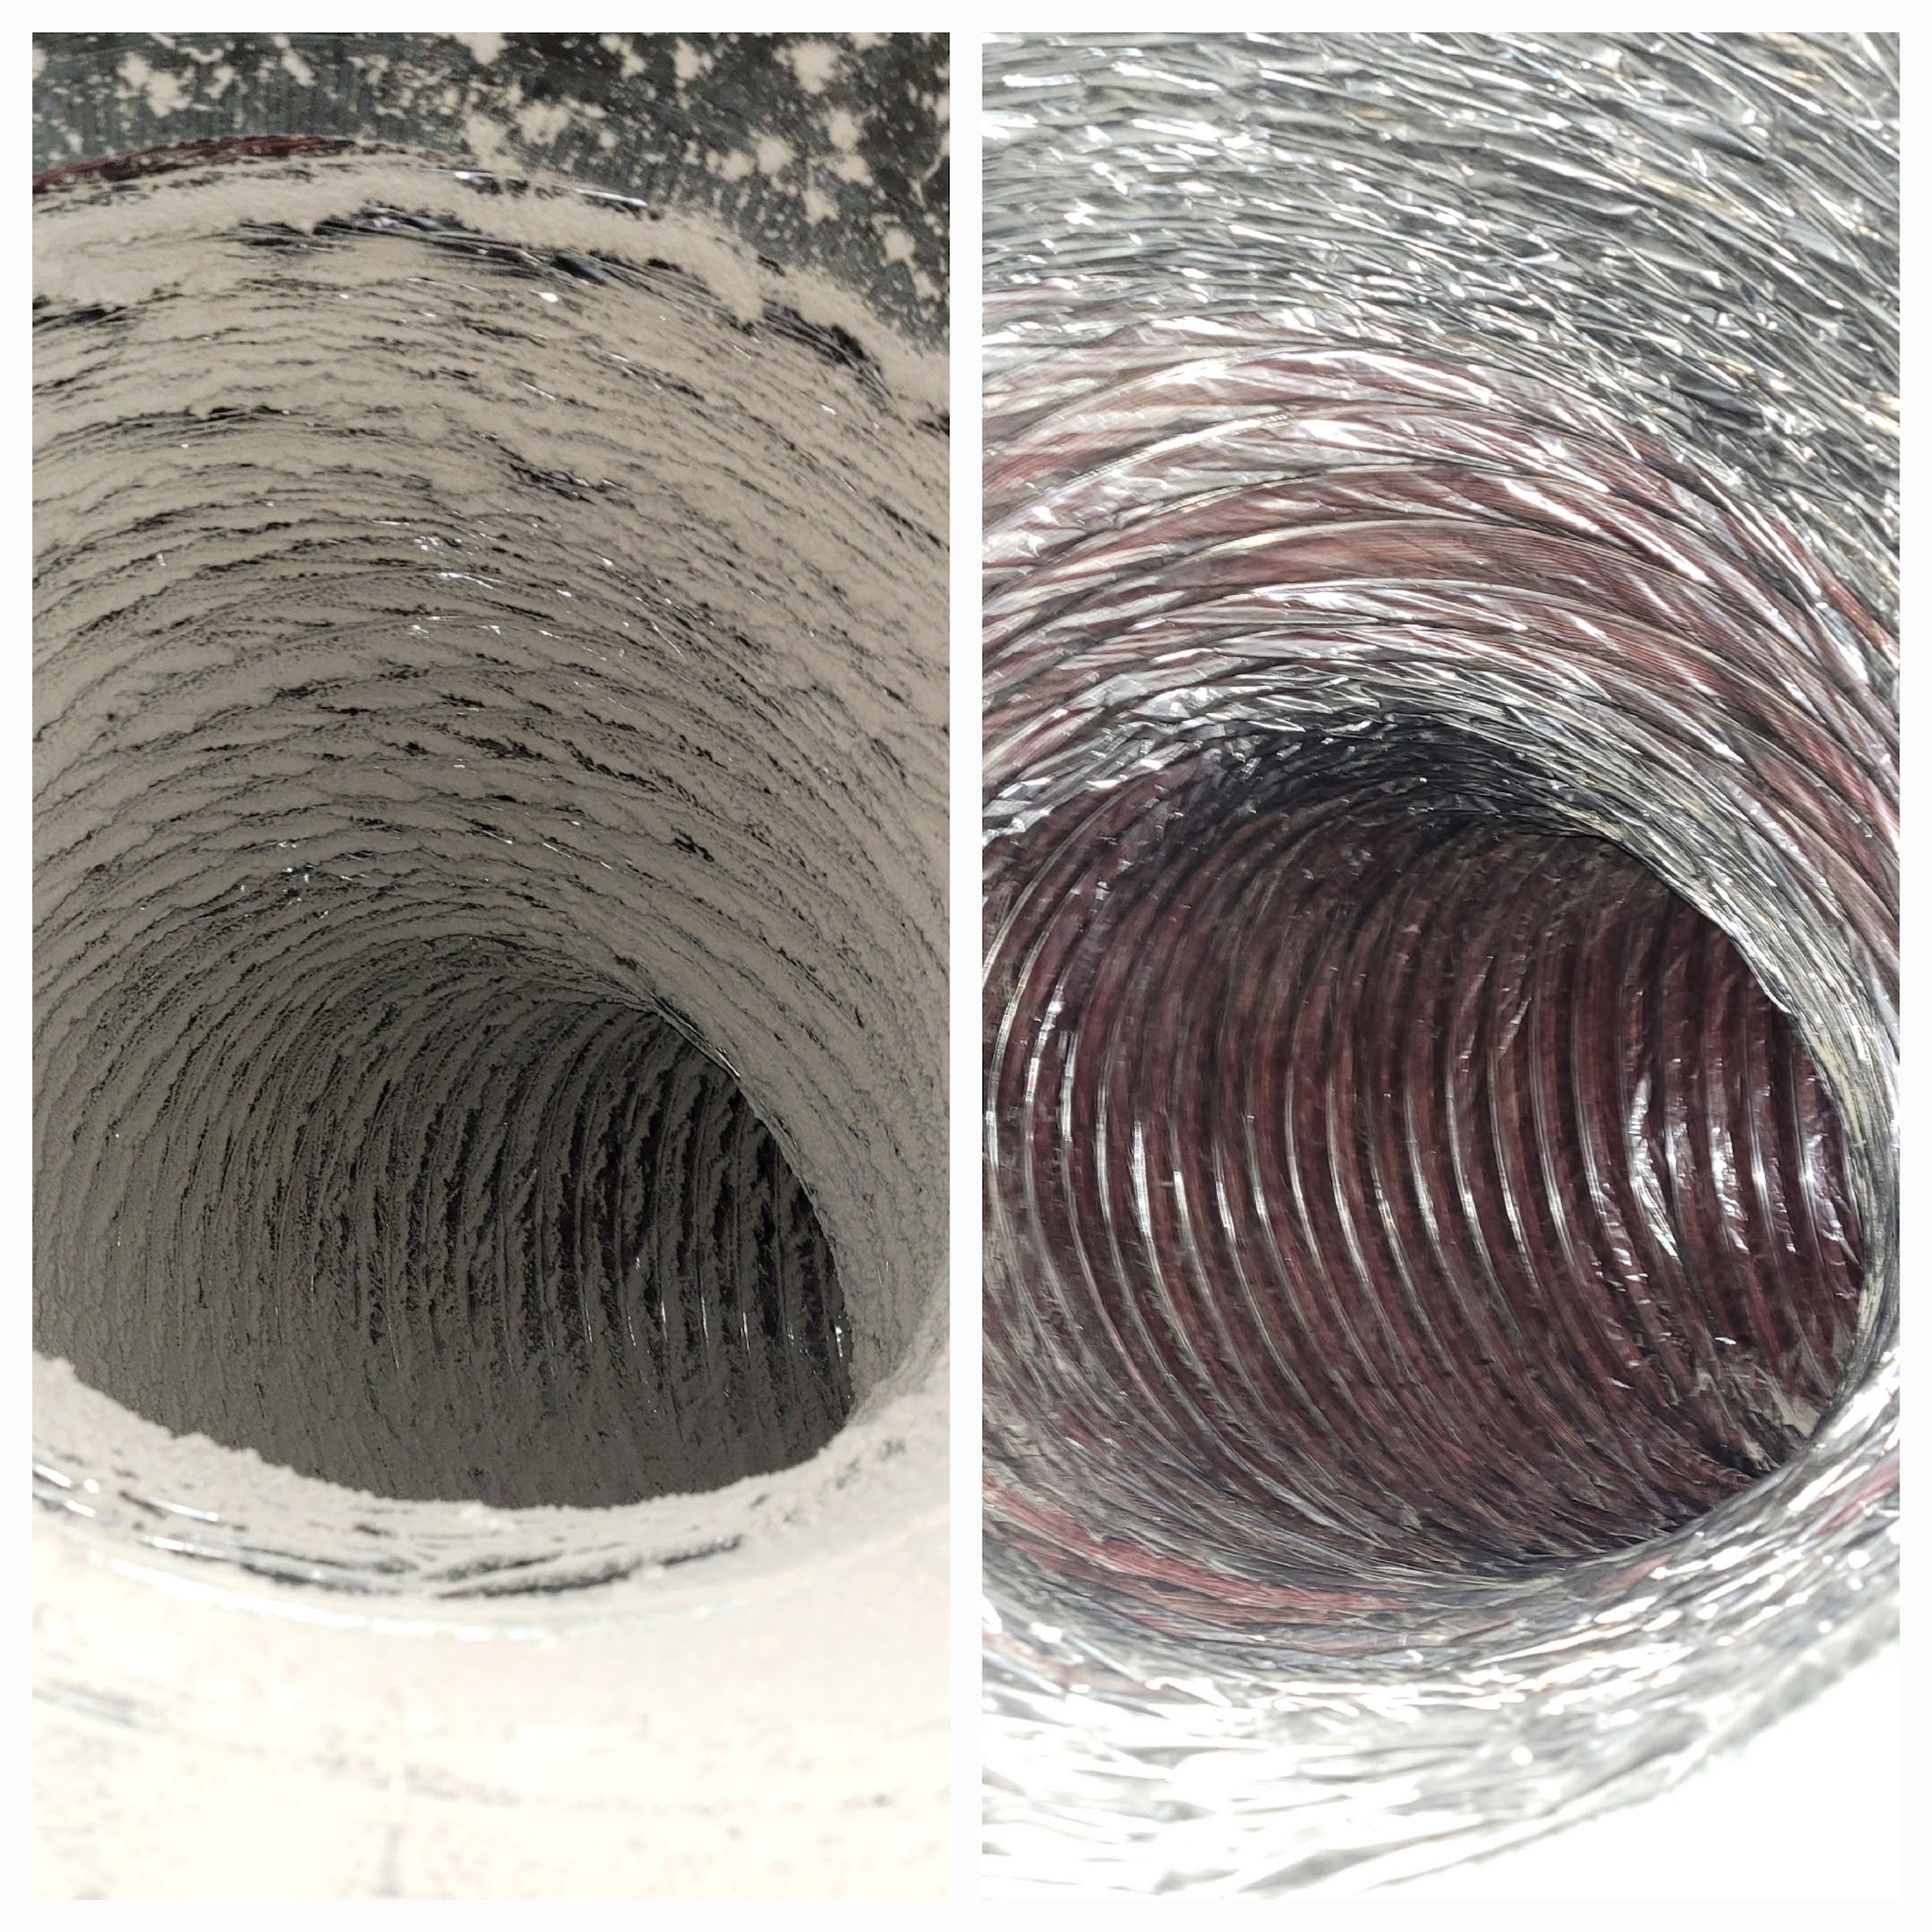 Ranger Duct and Dryer Vent Cleaning 3490 E County Rd 675 N, Bainbridge Indiana 46105